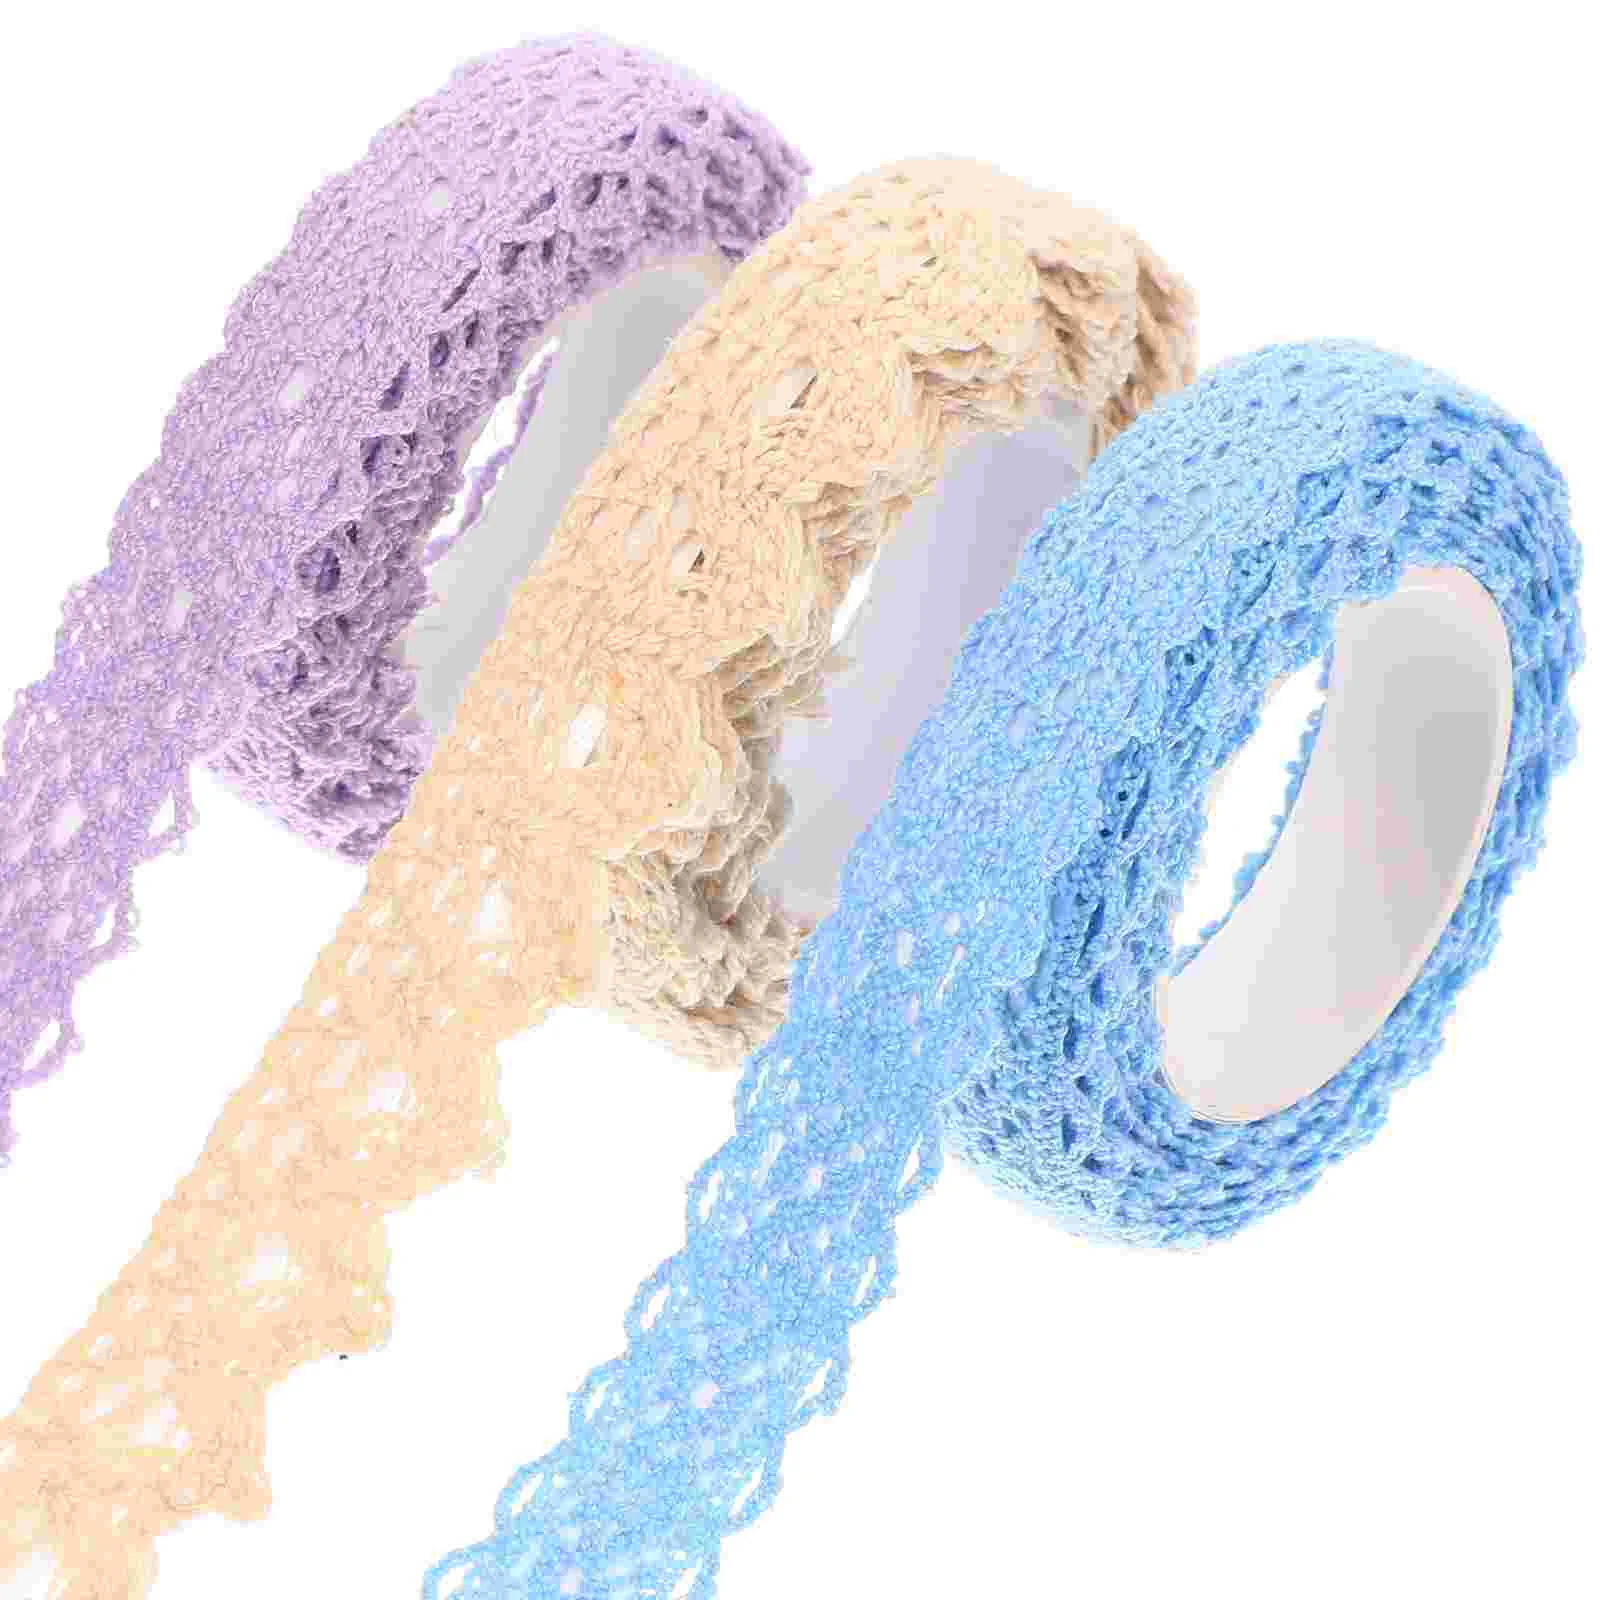 

3 Rolls Fabric Lace Tape Self-adhesive Tapes Accessories Decors Decorative Stickers Packaging Scrapbook Scrapbooking stationery